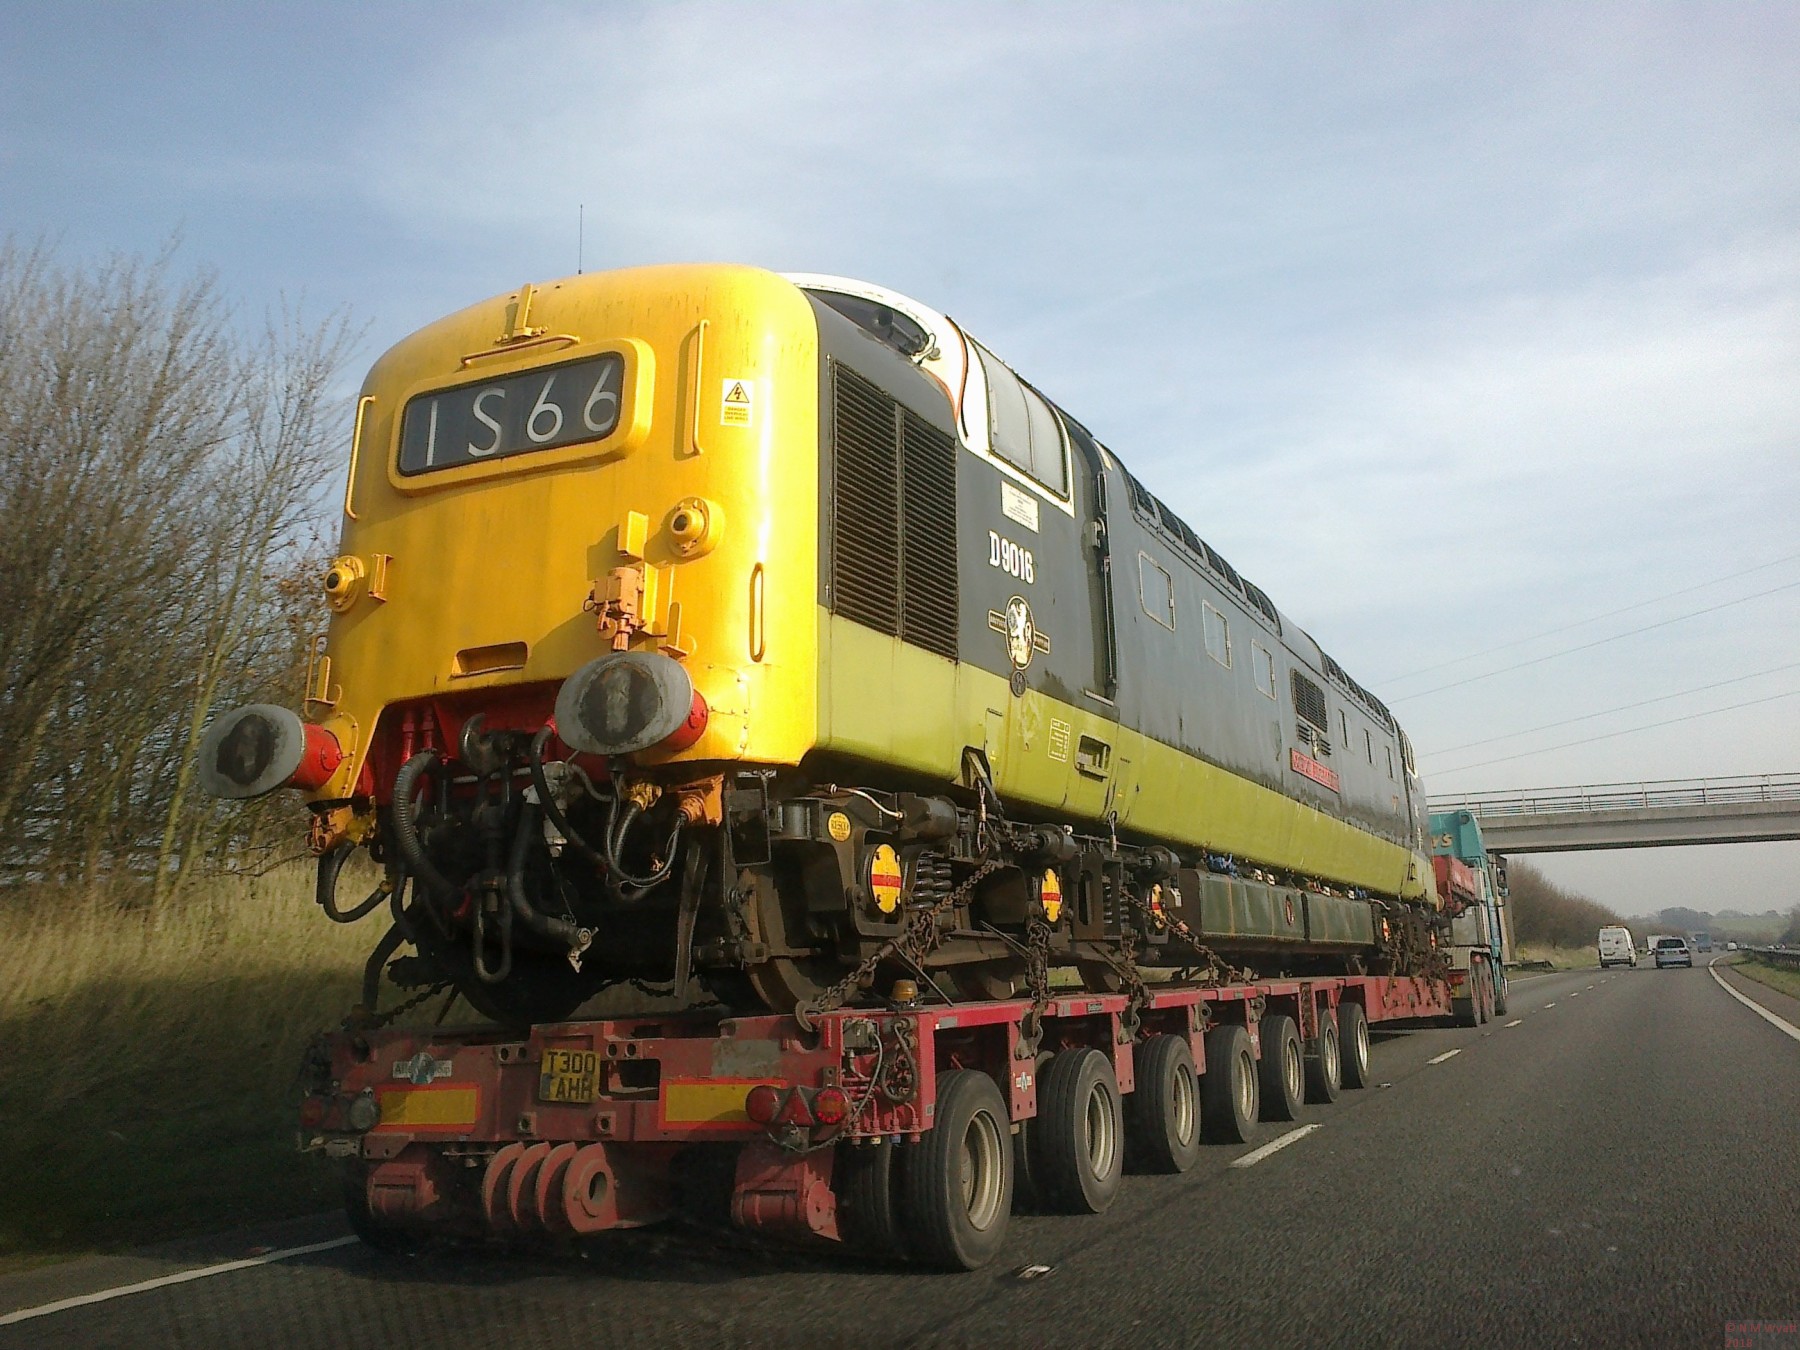 Deltic D9016 in transit on the A50 in 2014